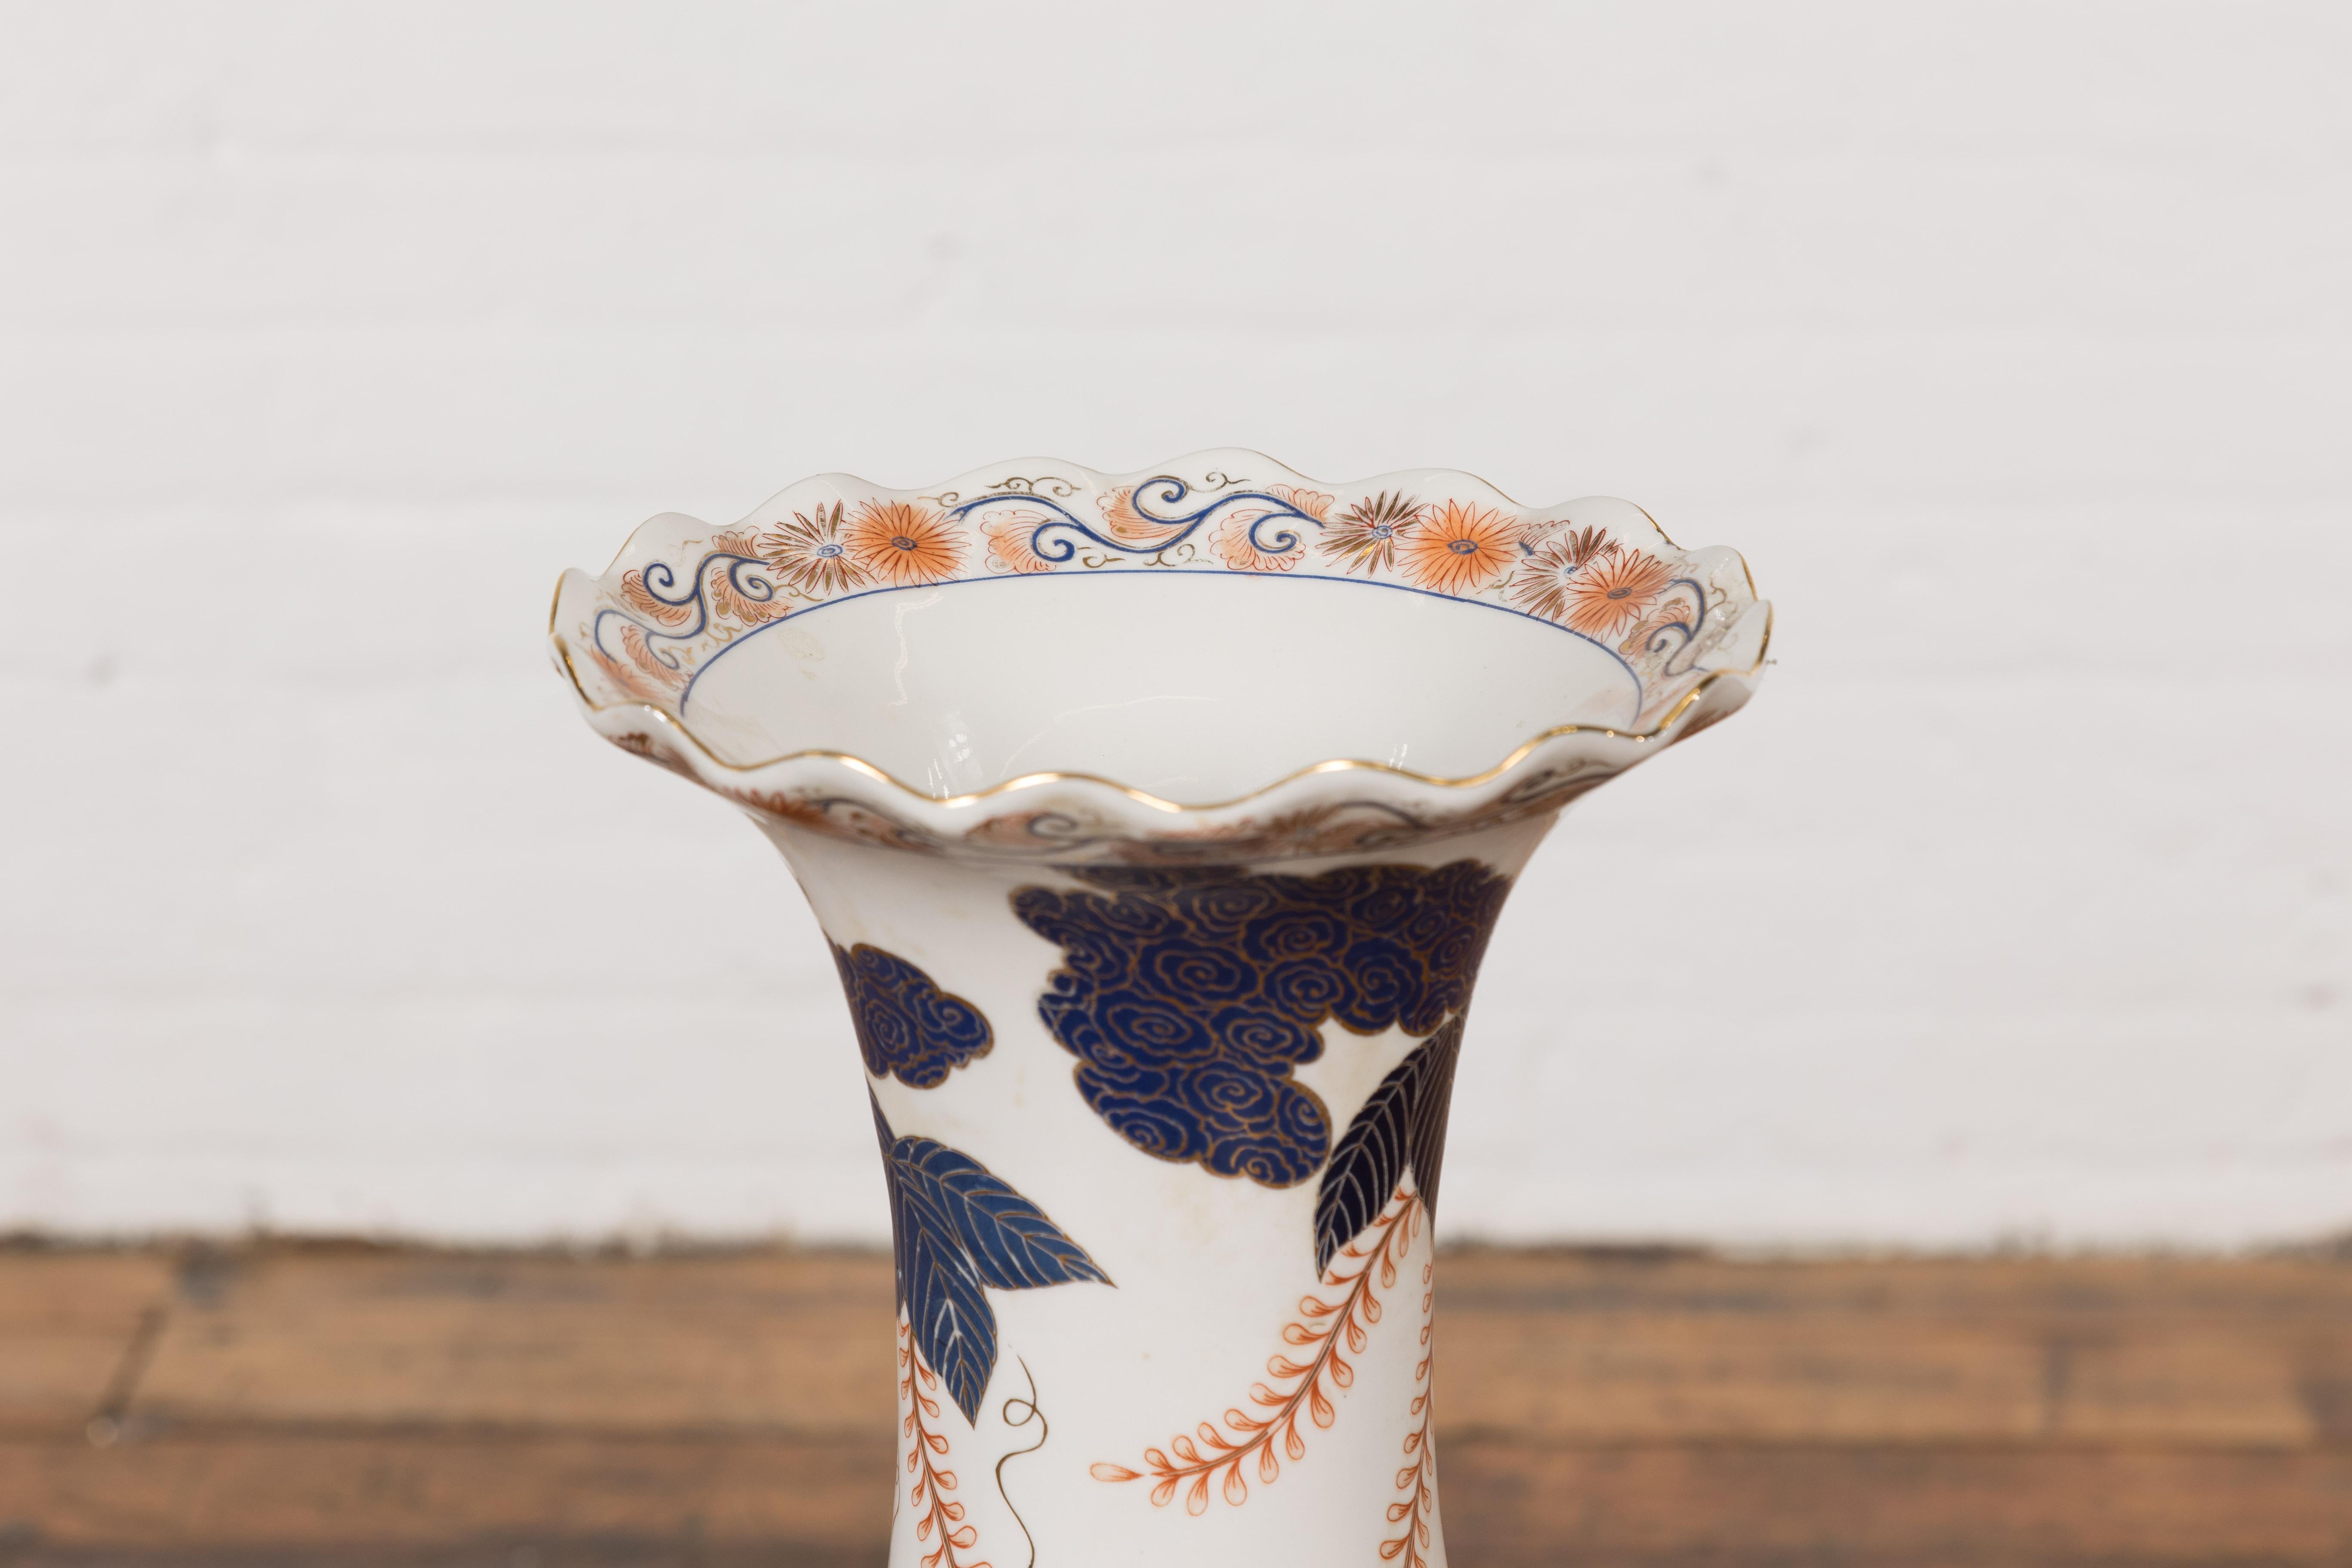 Chinese Imari Style Porcelain Altar Vase with Orange, Blue and Green Décor In Good Condition For Sale In Yonkers, NY